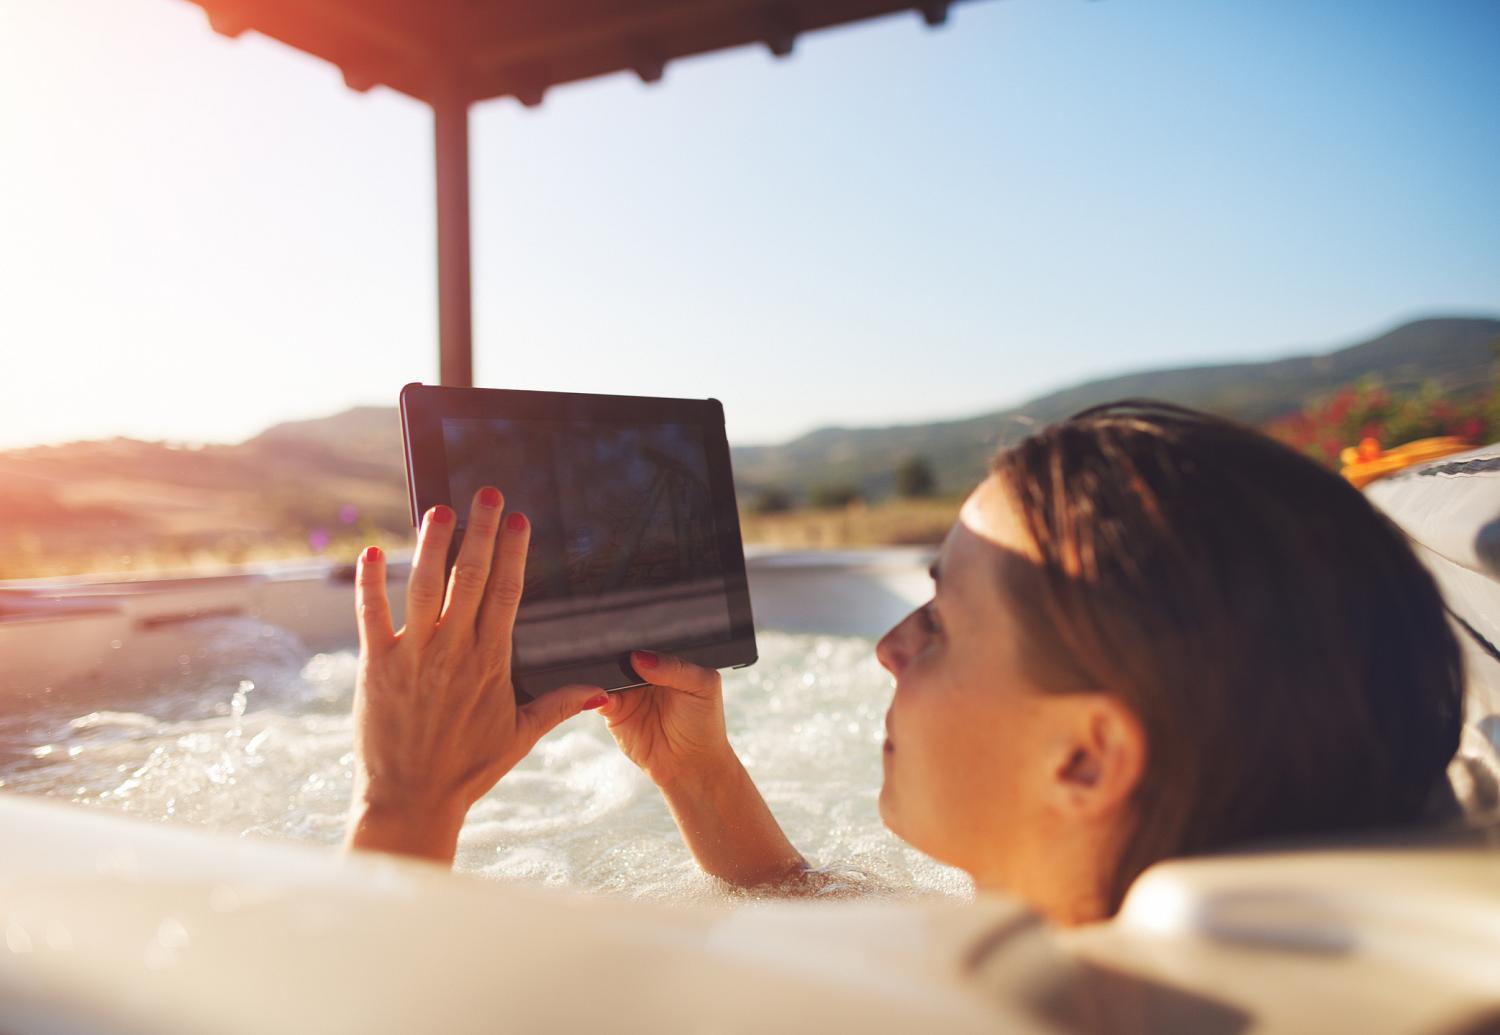 Here are the 5 hot tub how-to videos you should be watching